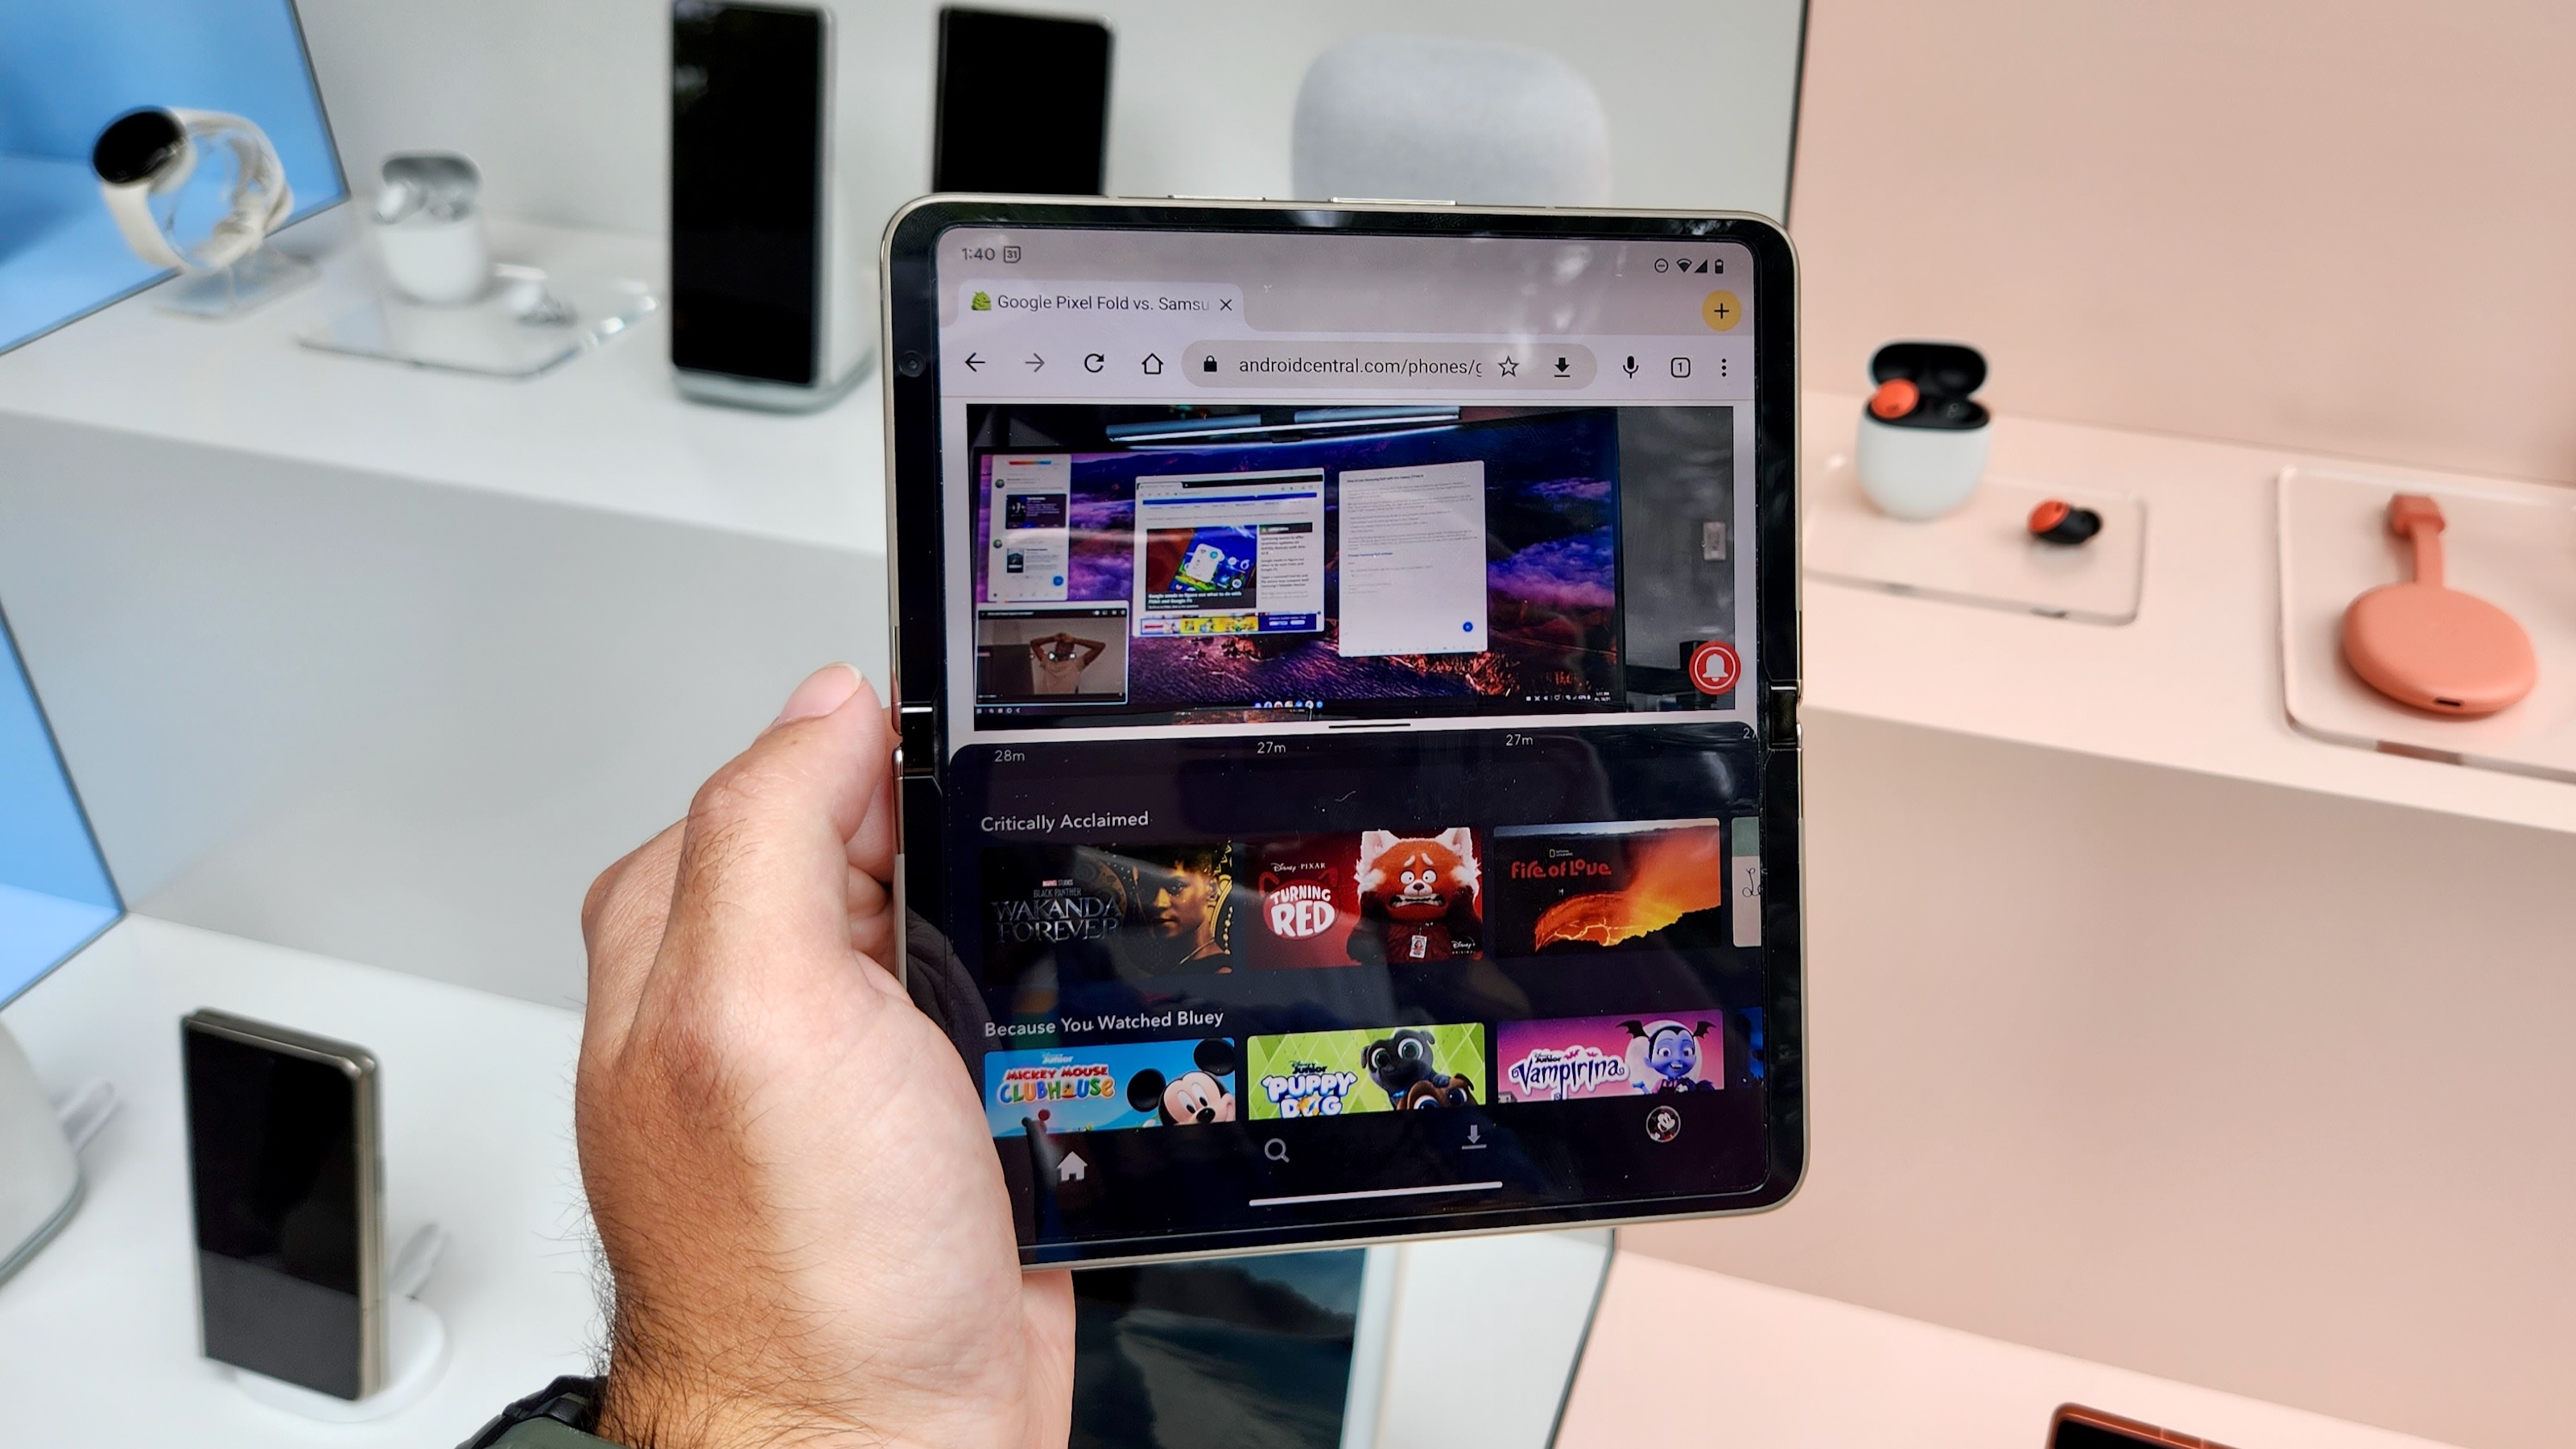 Split-screening two Android apps on the Google Pixel Fold